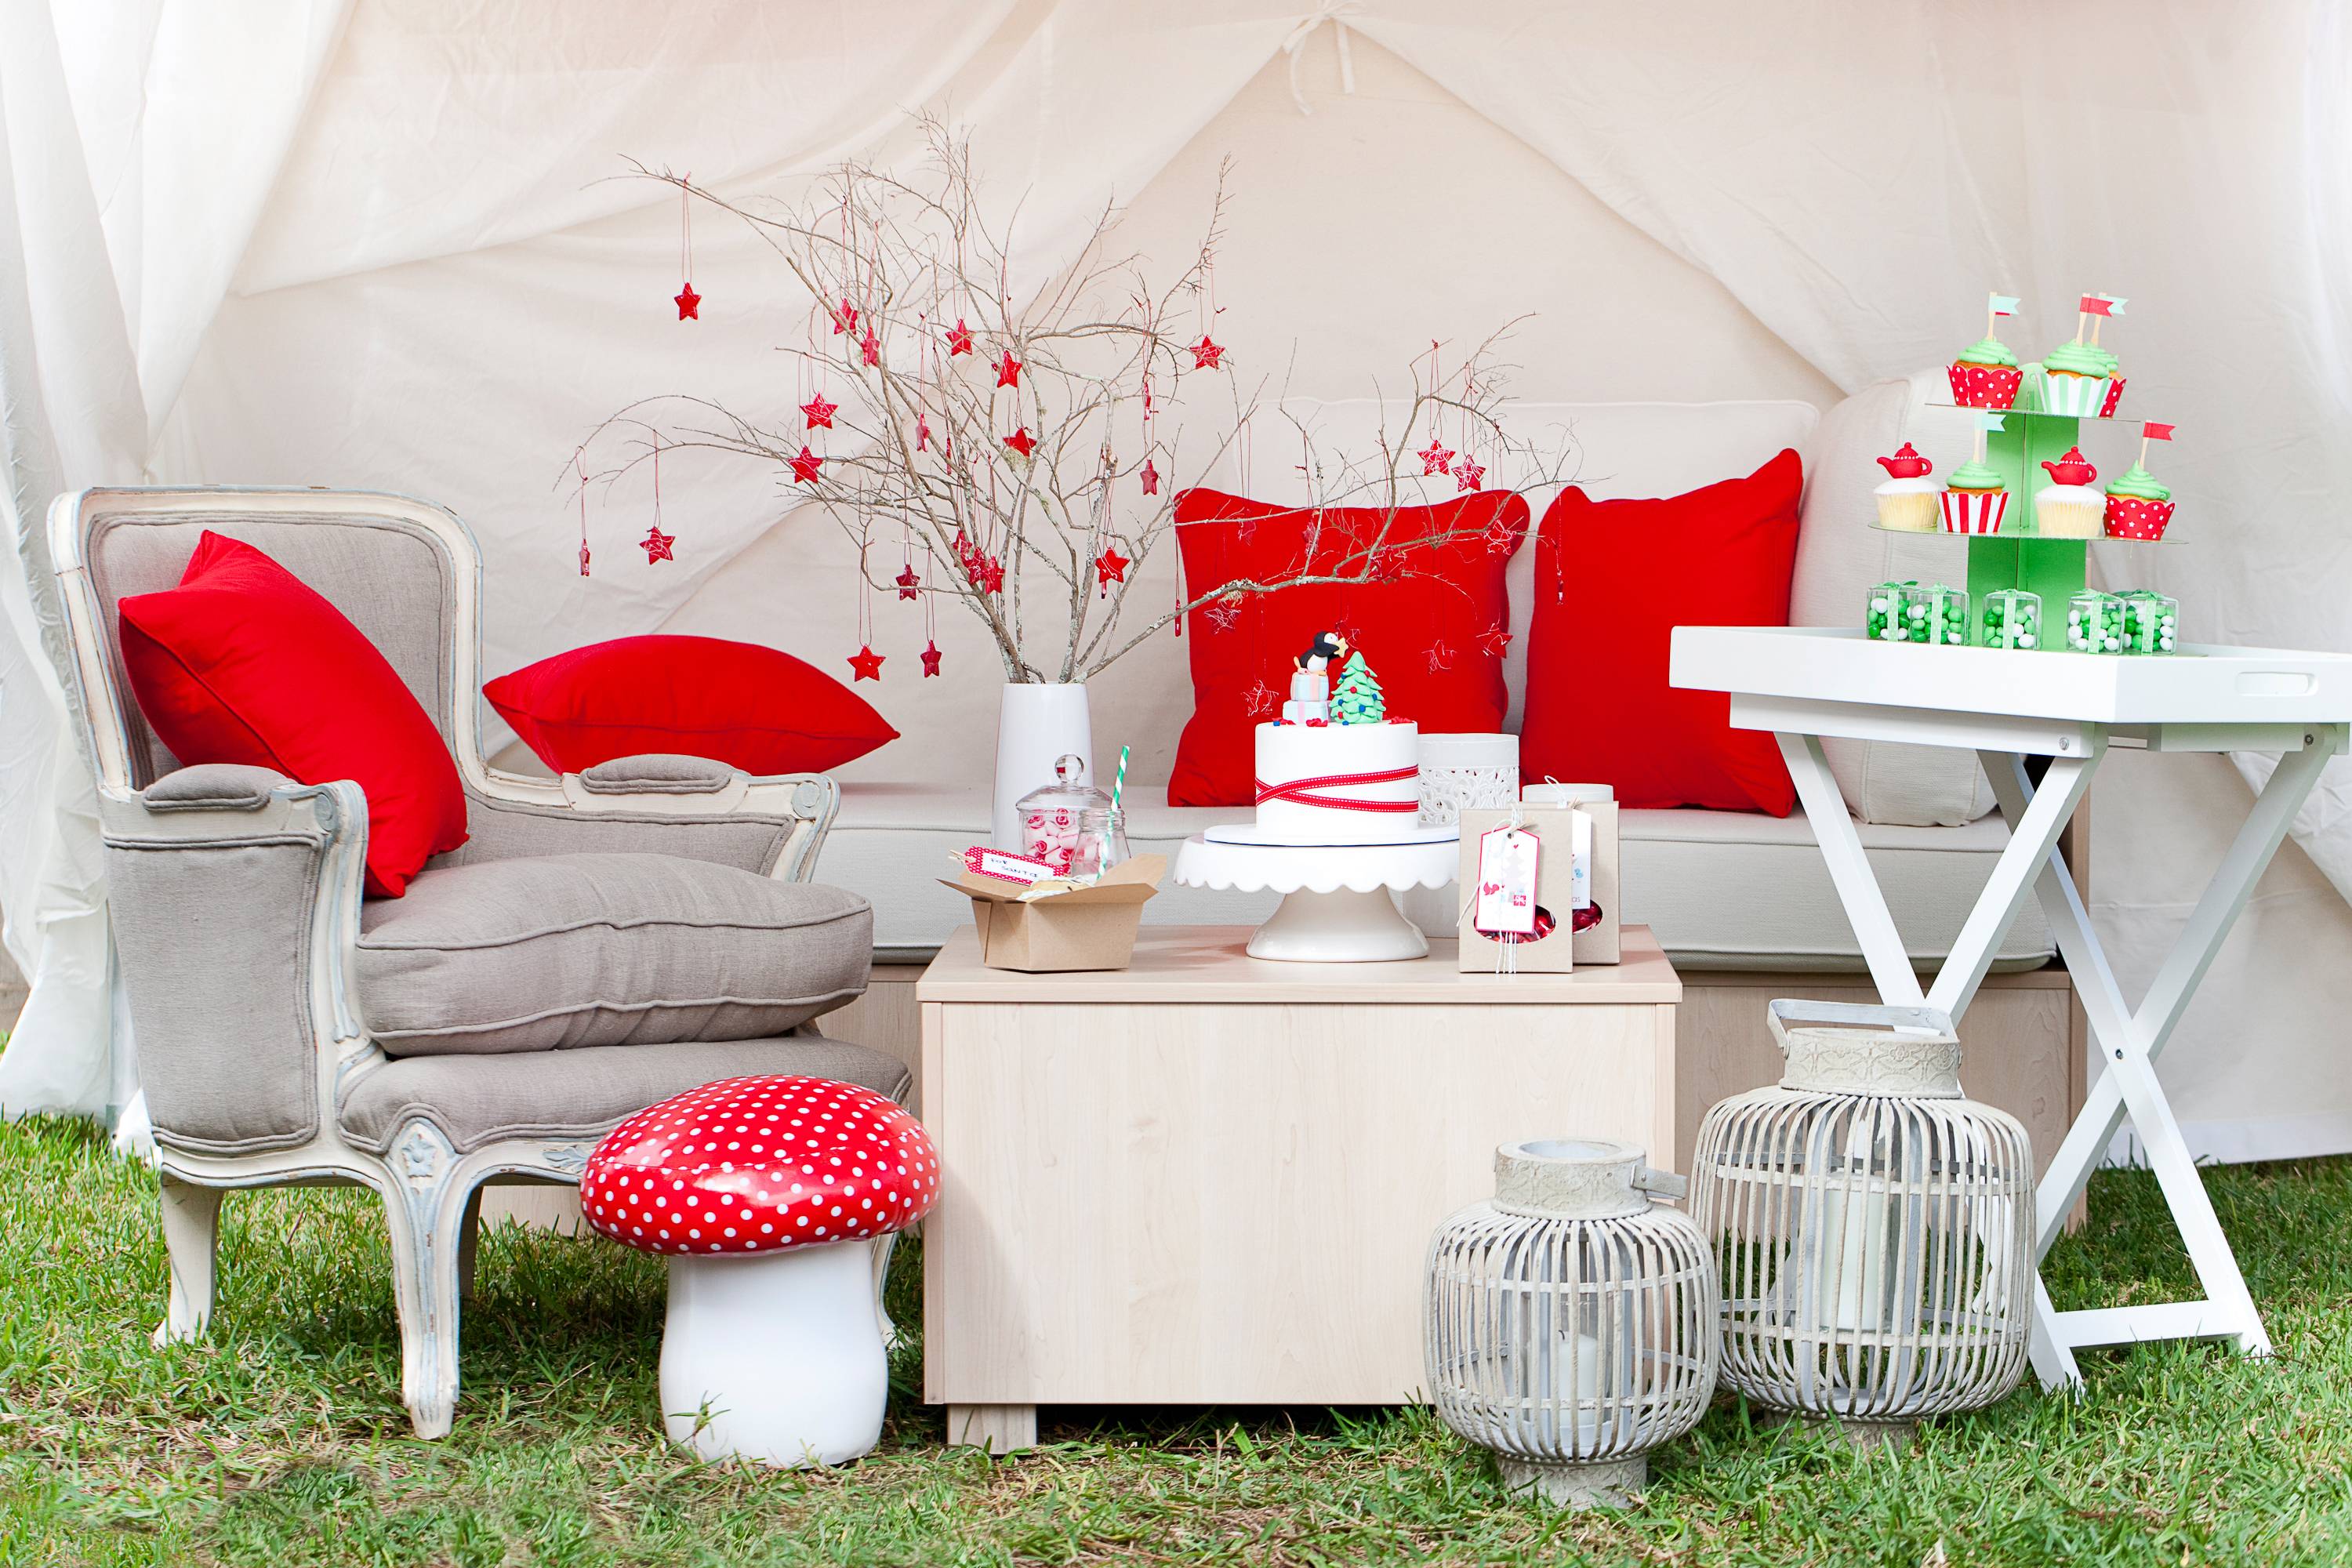 Outdoor Christmas Party Decorations  Home Design